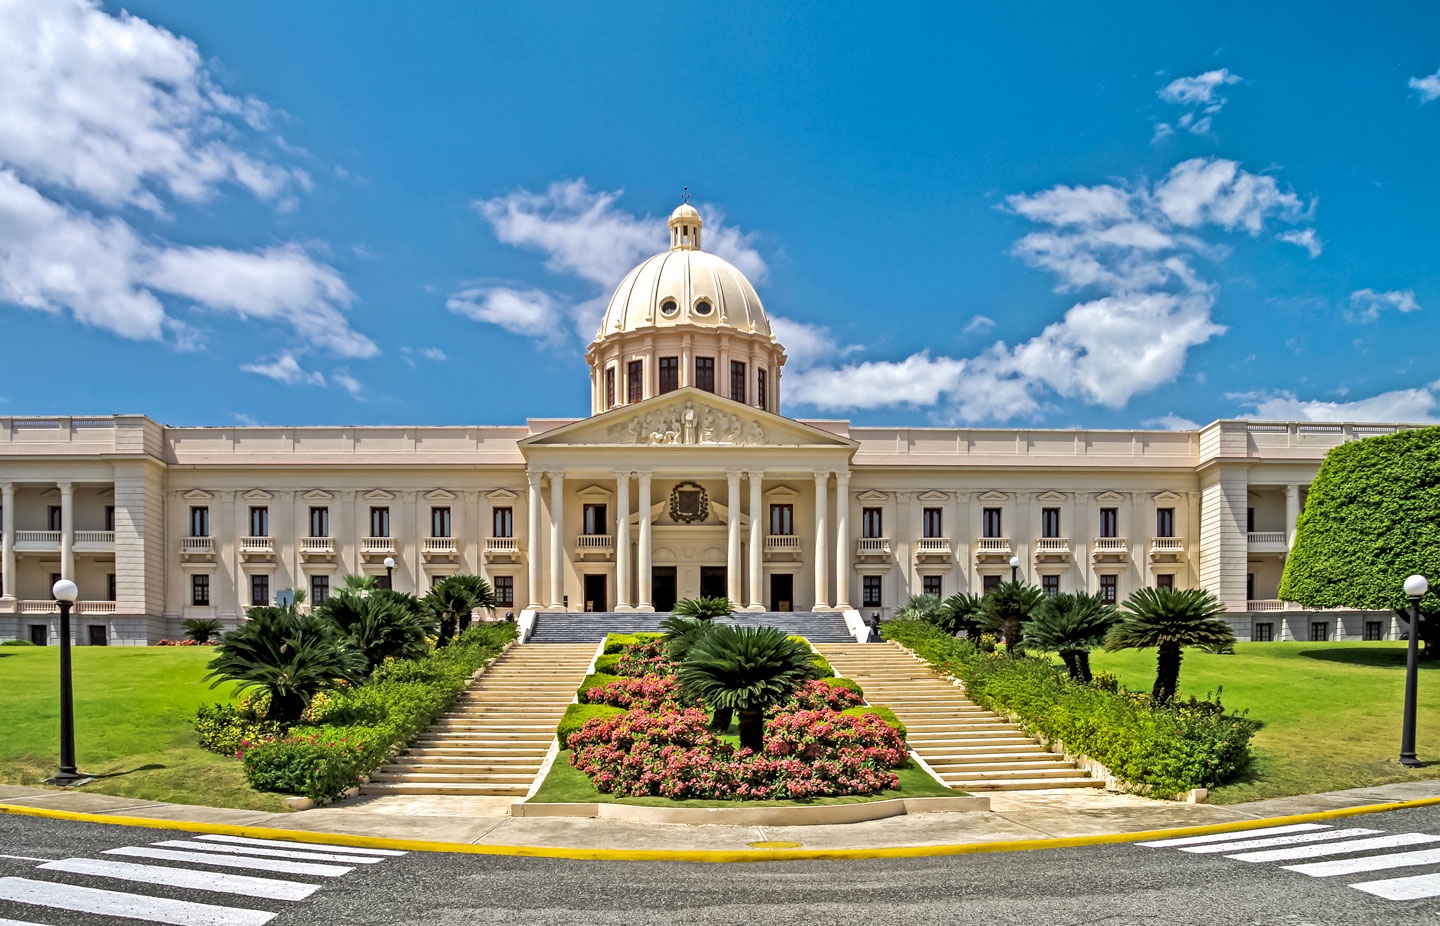 National Palace in Santo Domingo, Dominican Republic